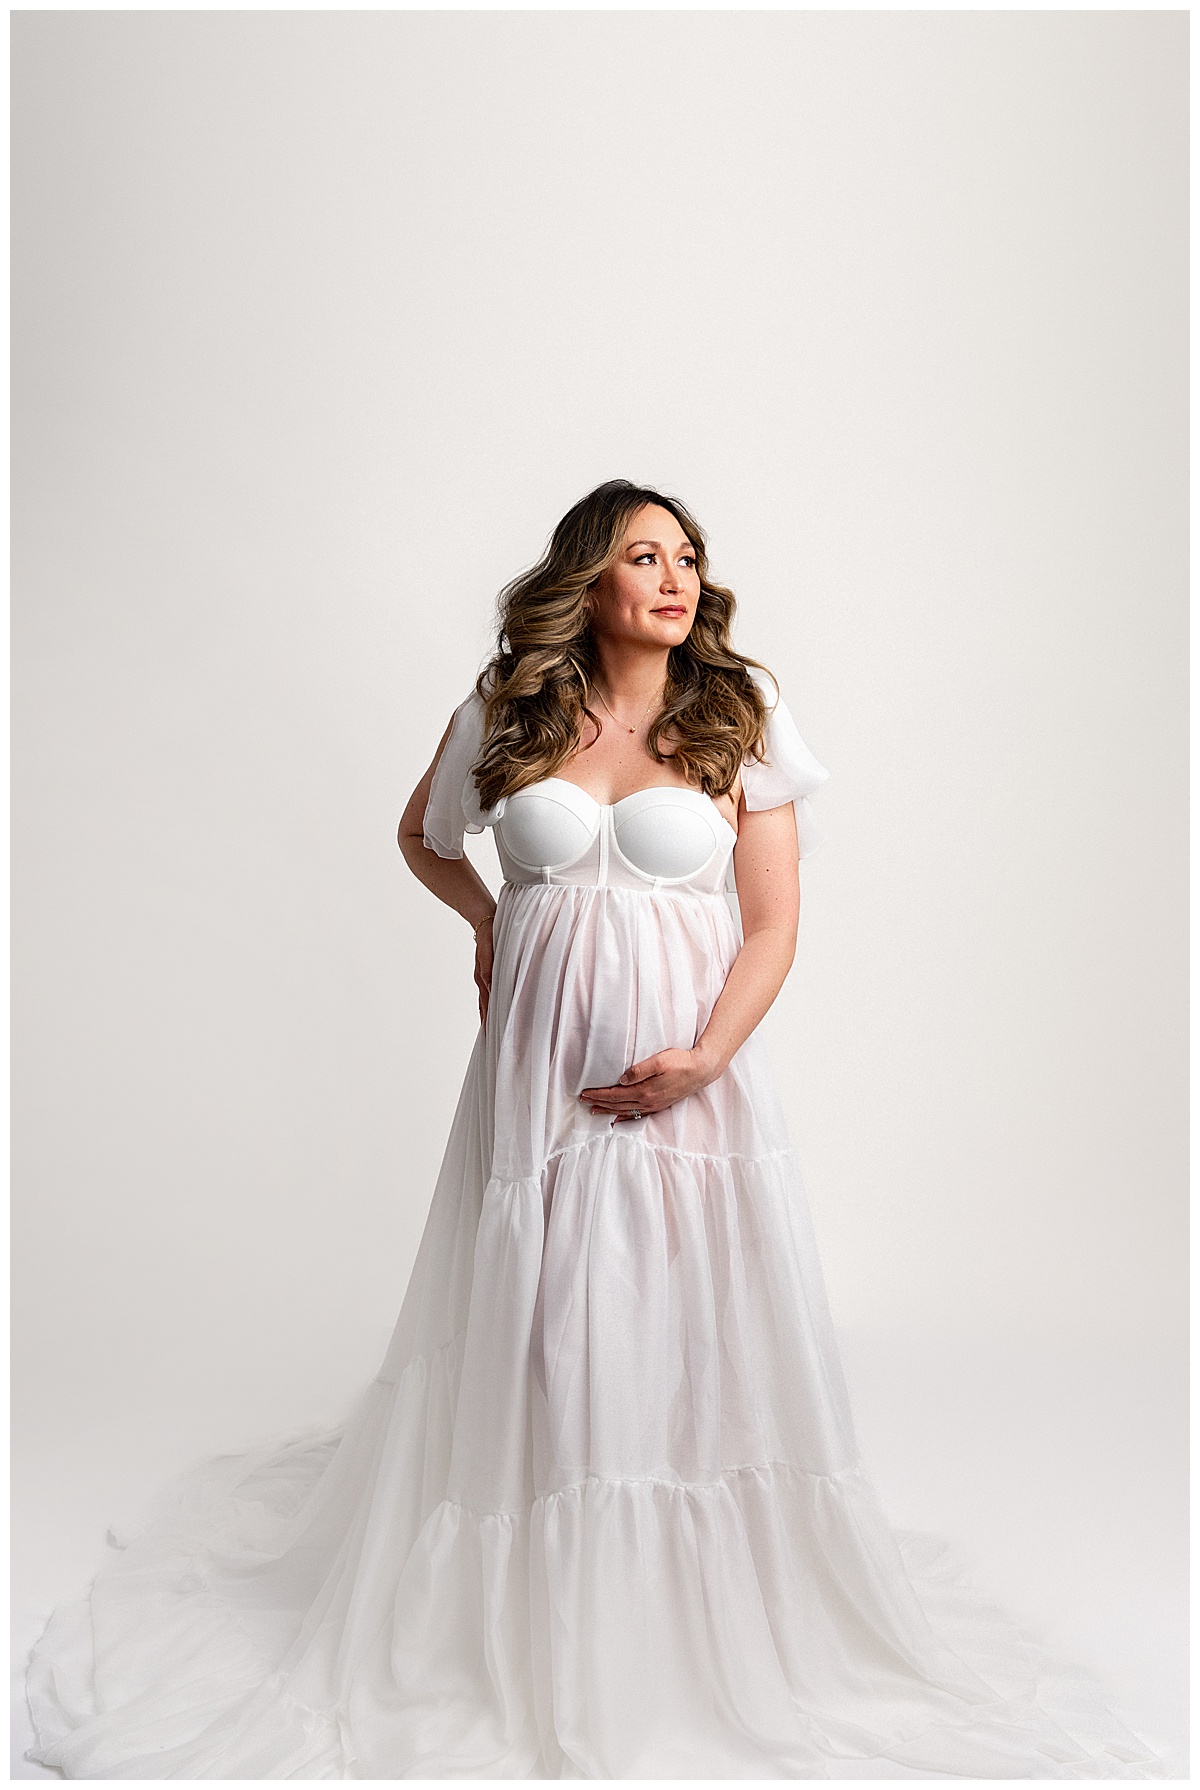 Mother holds pregnant belly wearing white maternity gown for Norma Fayak Photography 